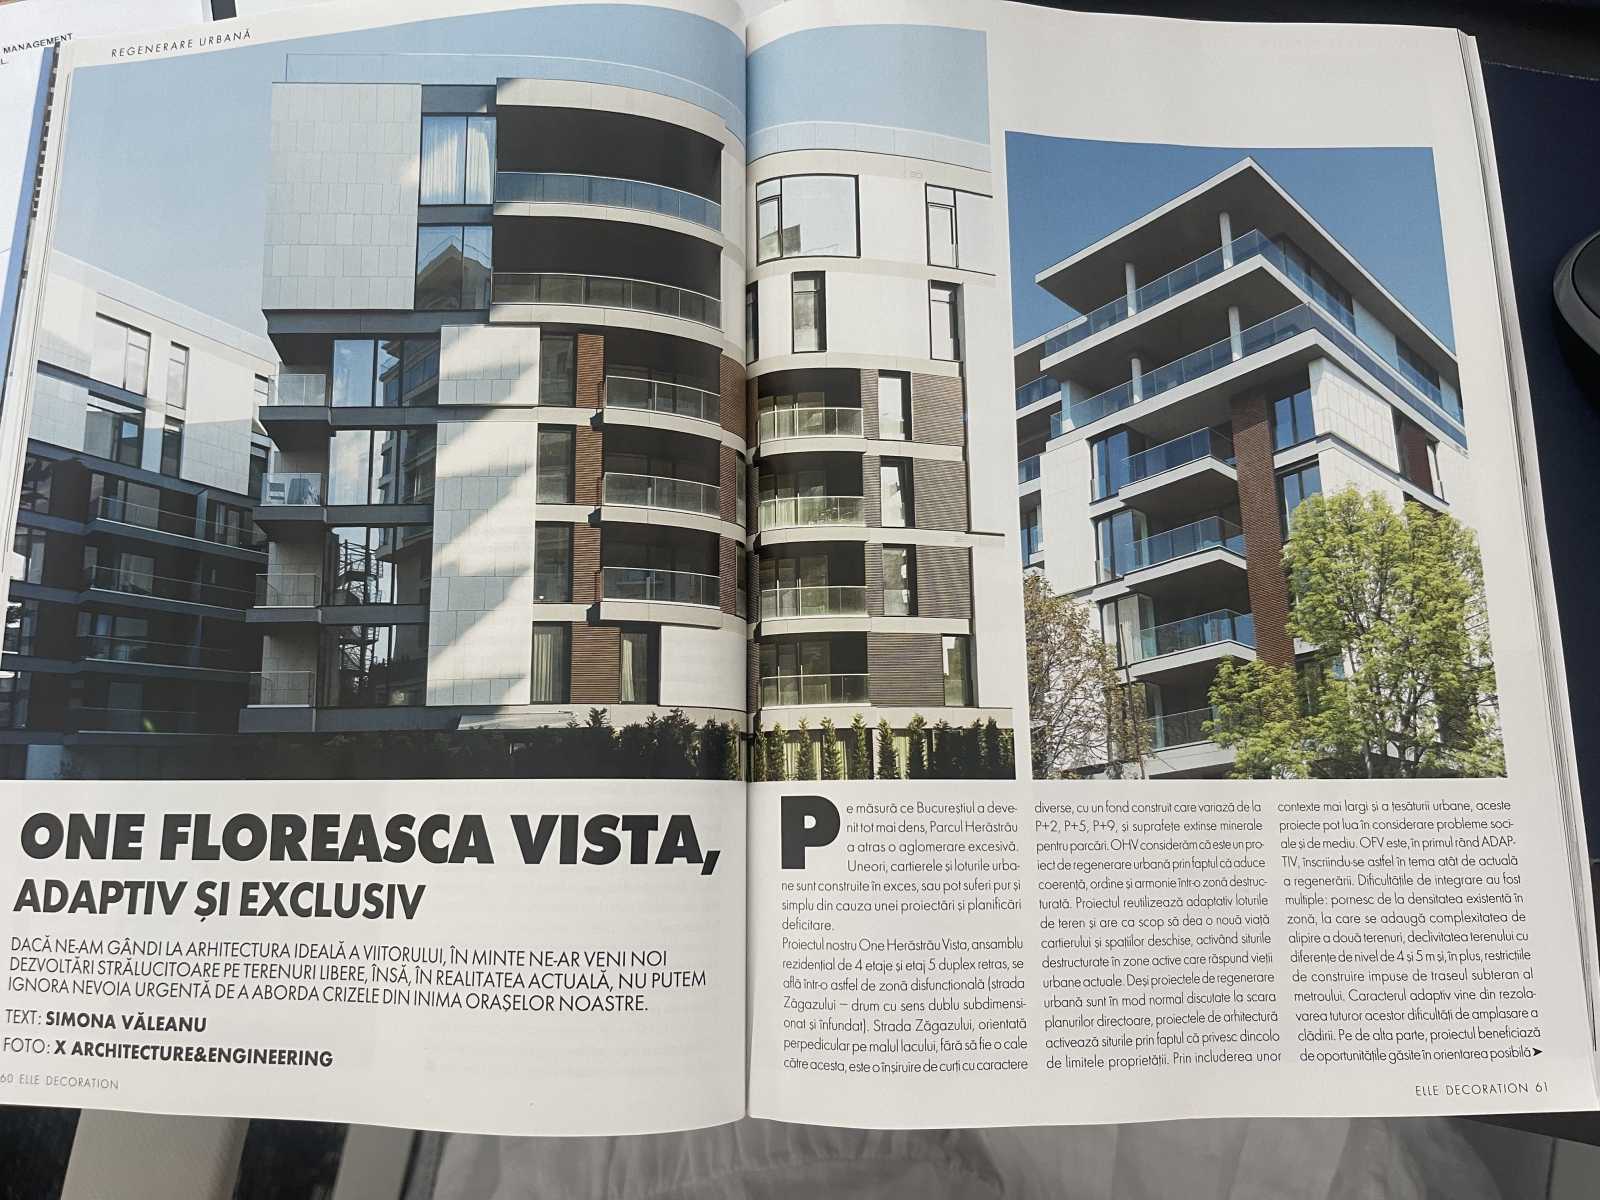 One Floreasca Vista, in the latest issue of ELLE Decoration magazine1